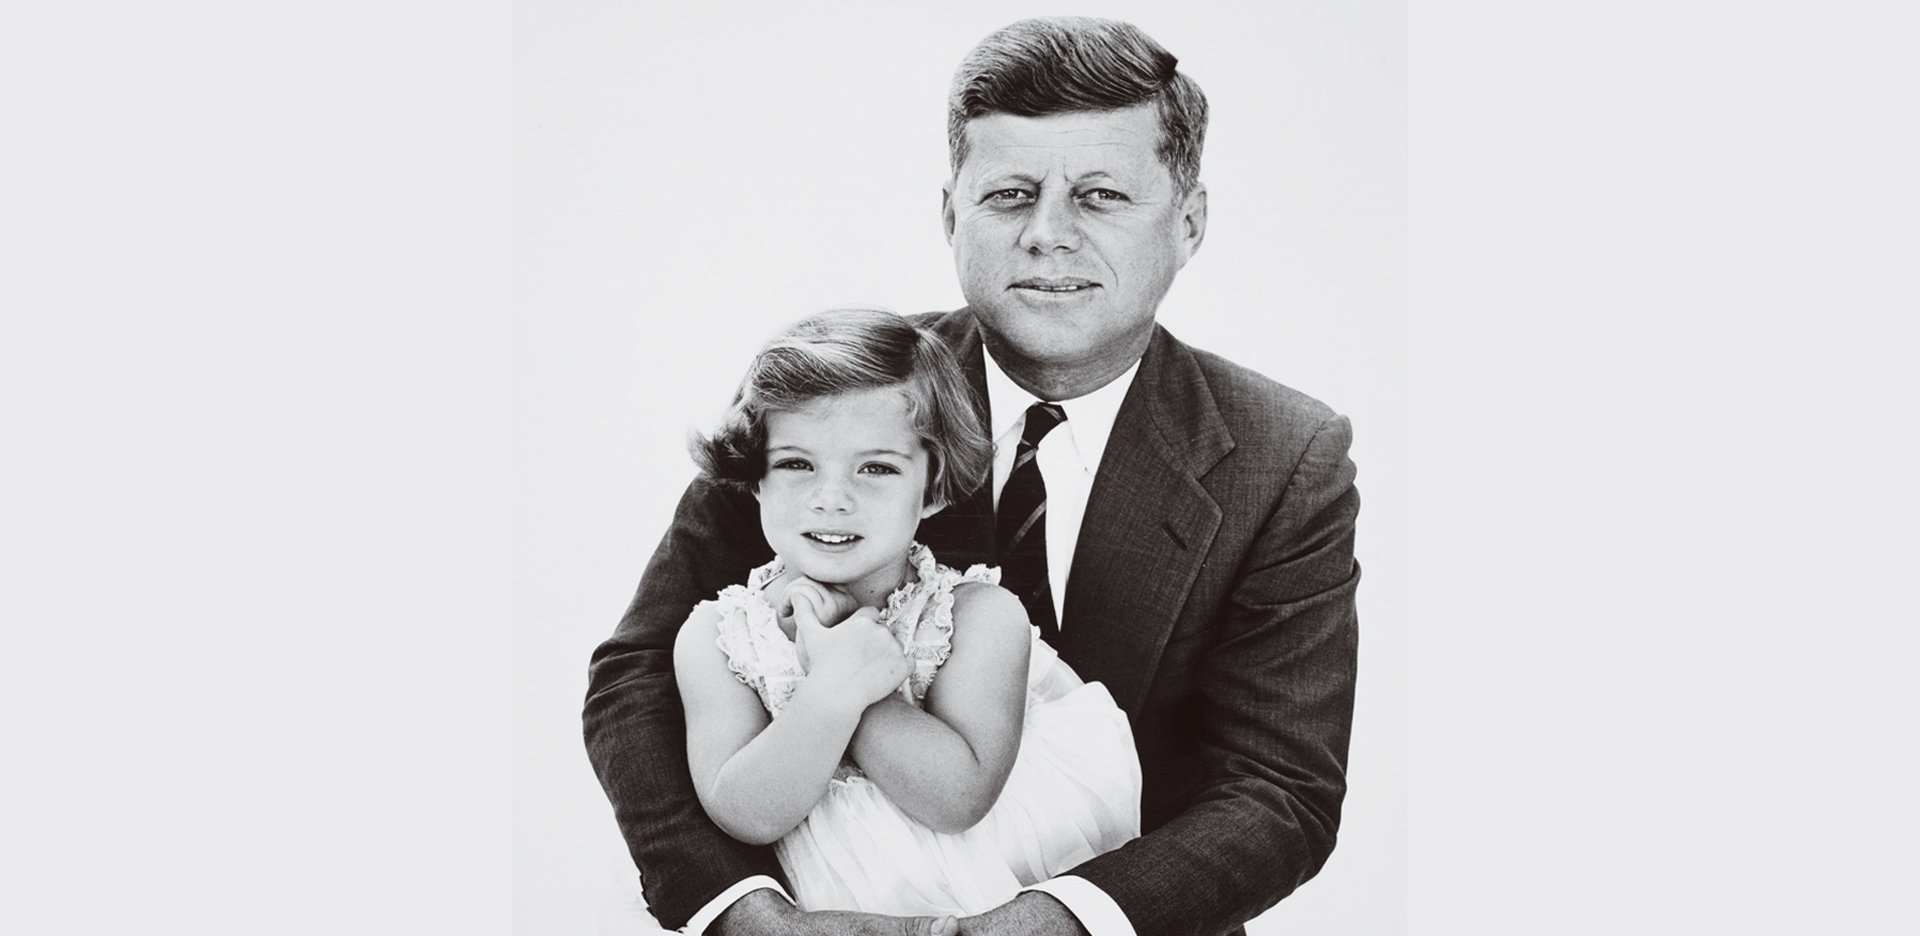 John F. Kennedy holding his daughter.